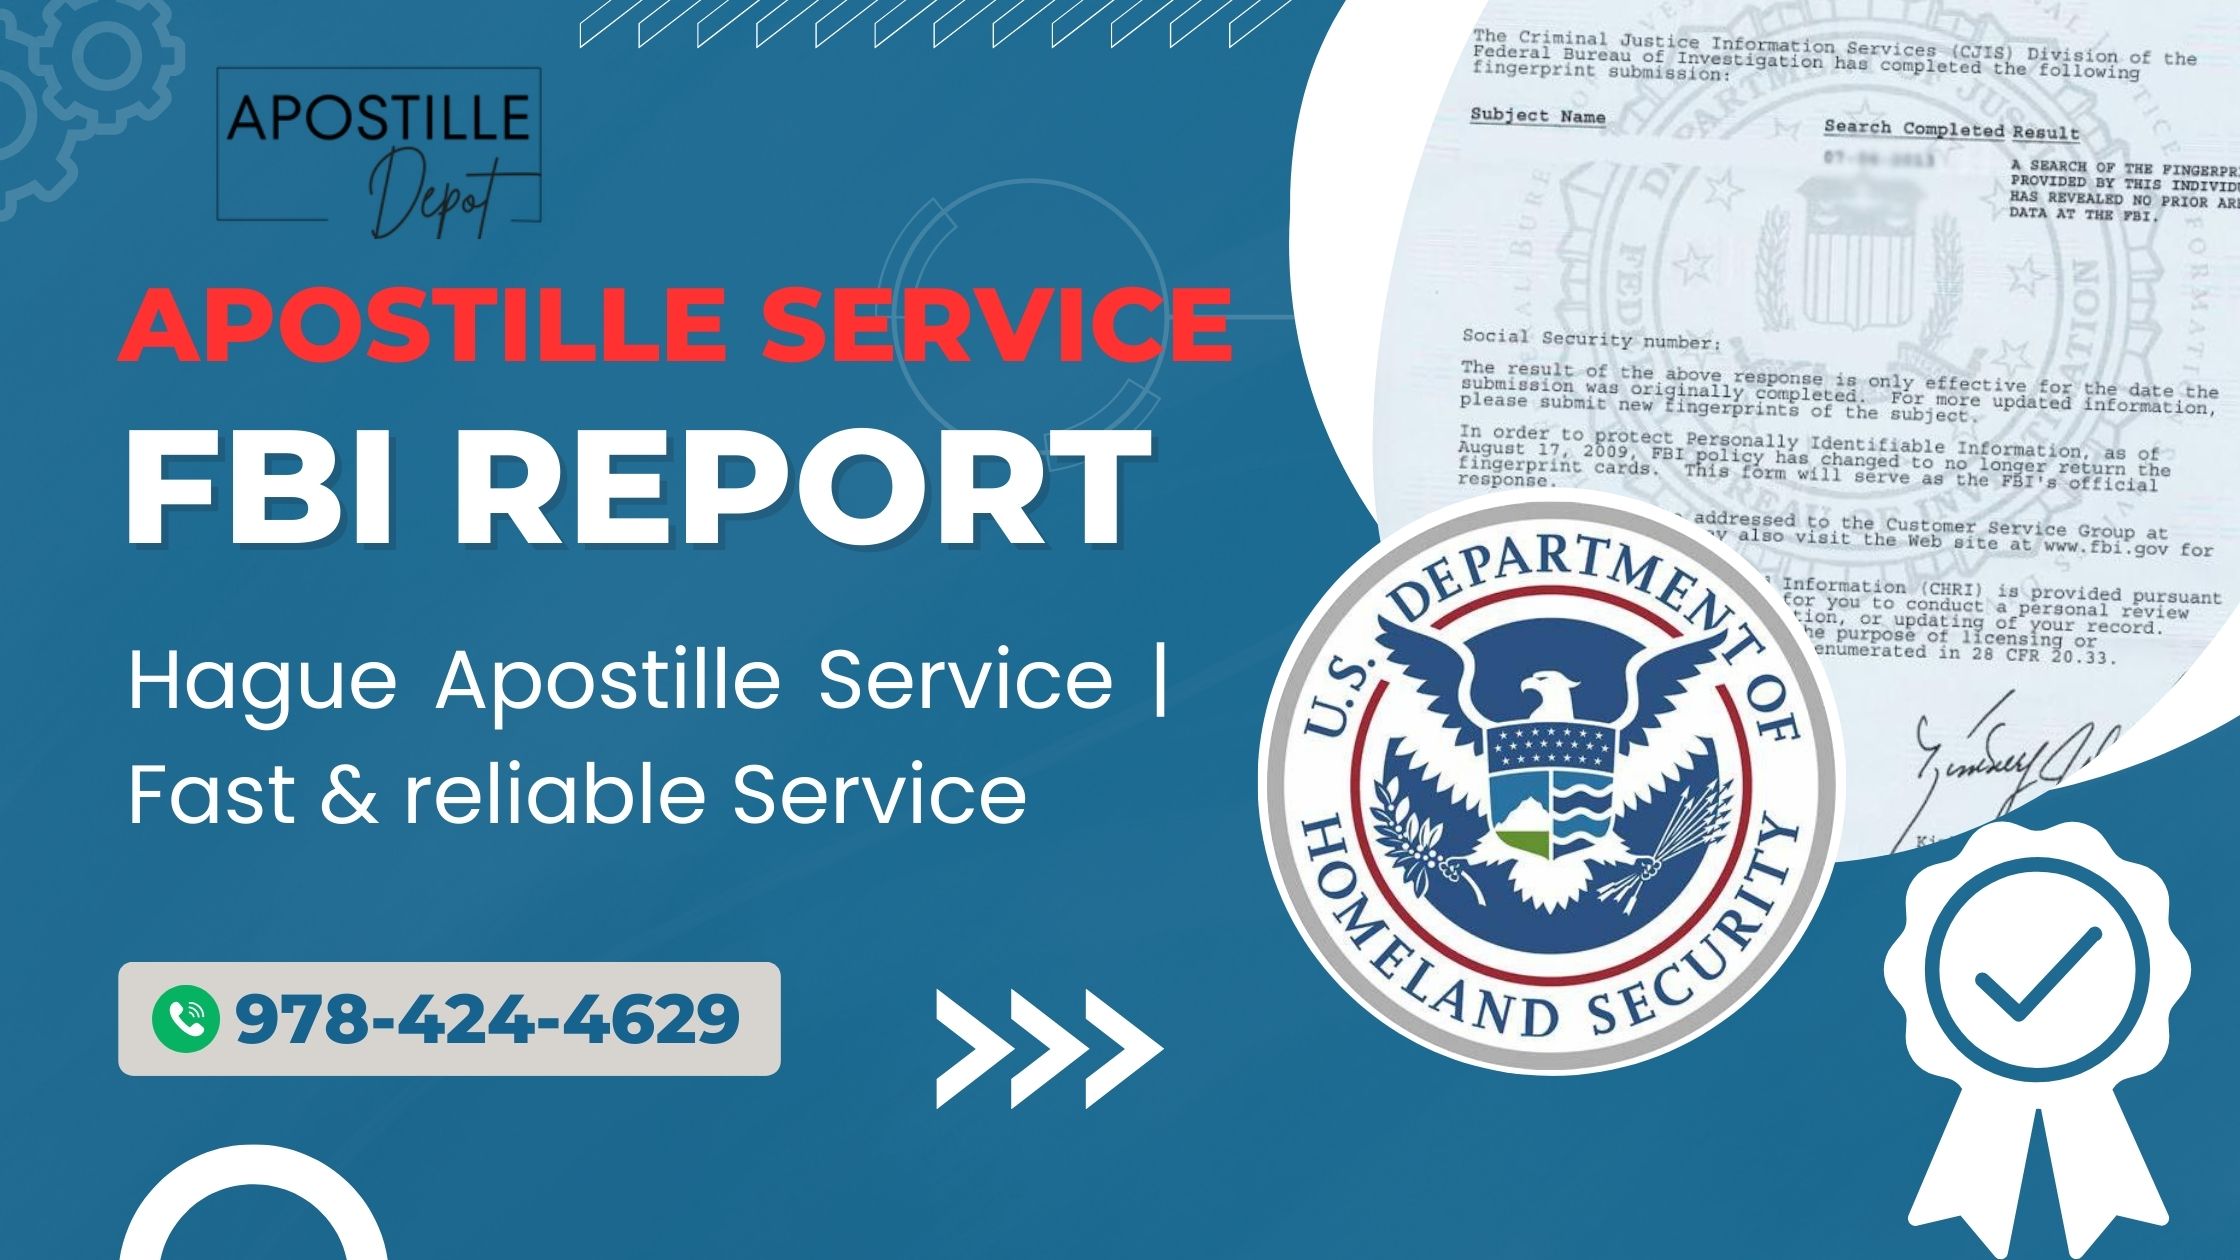 How To Apostille FBI Background Report